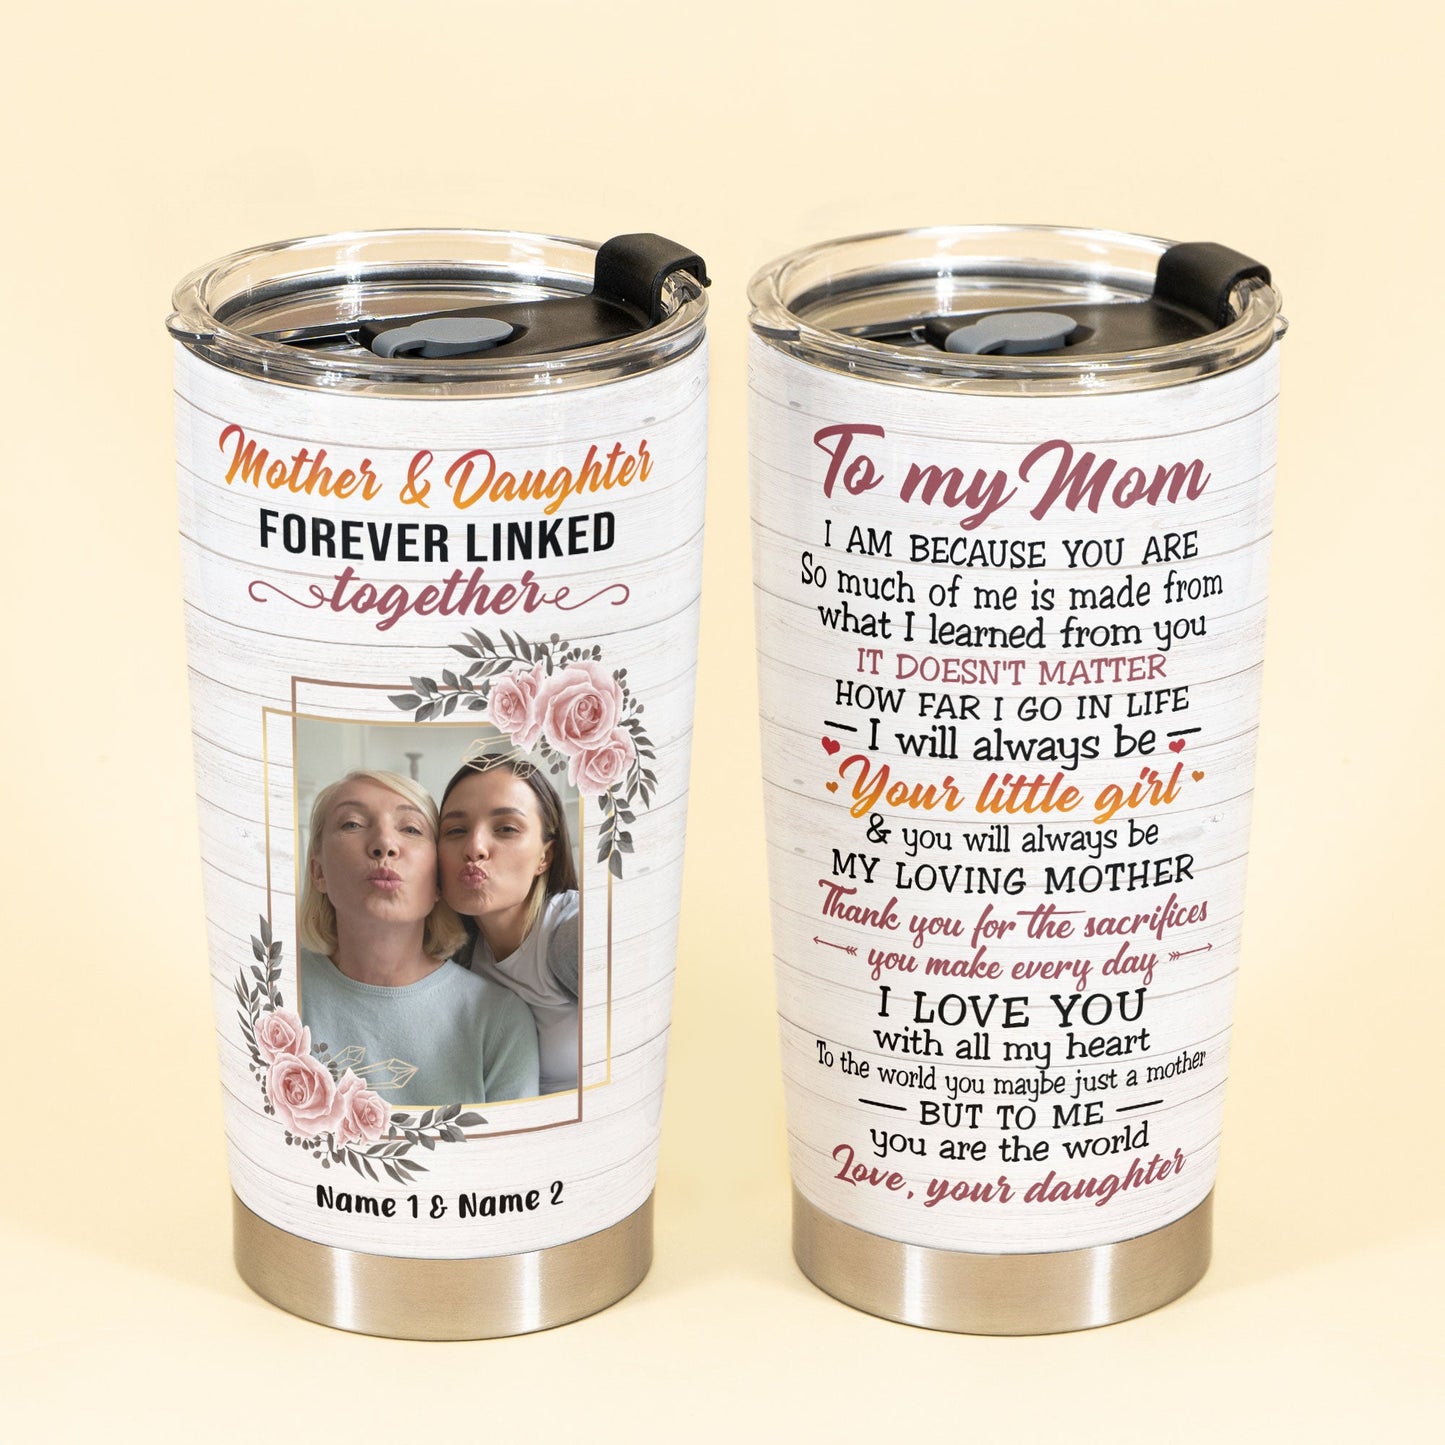 Mother's Day Tumbler, To My Mom You Are The World, Stainless Steel